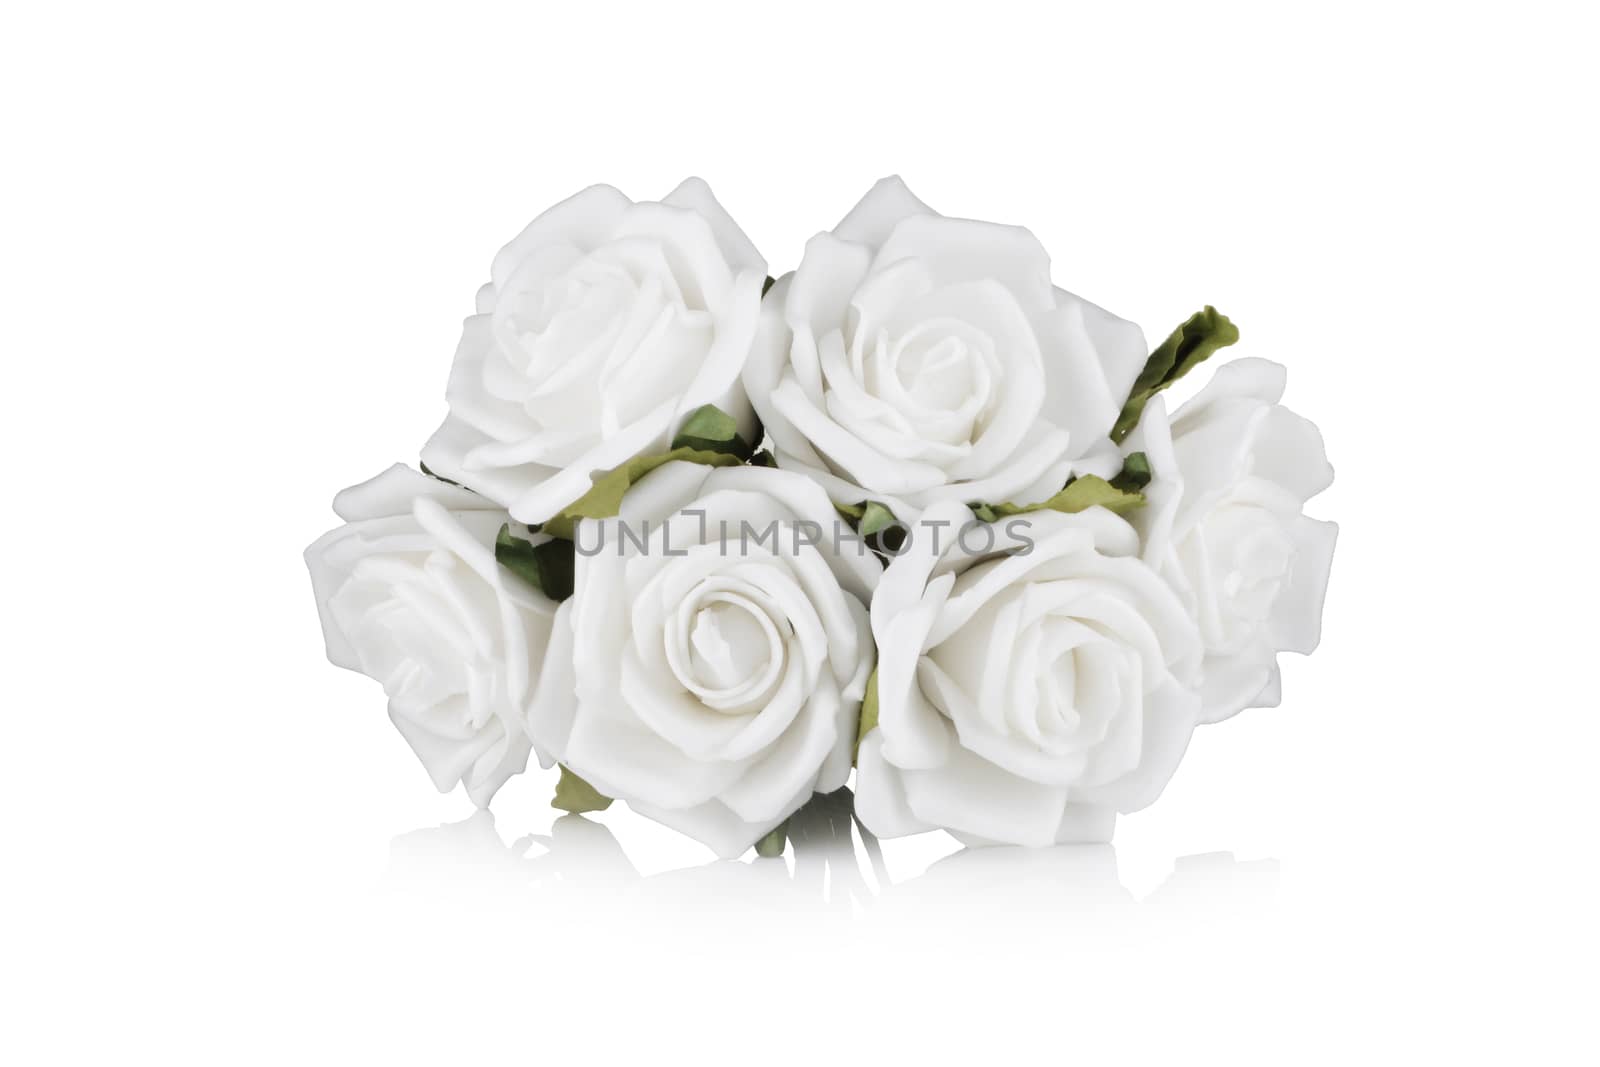 White paper roses on white with reflection by VivacityImages